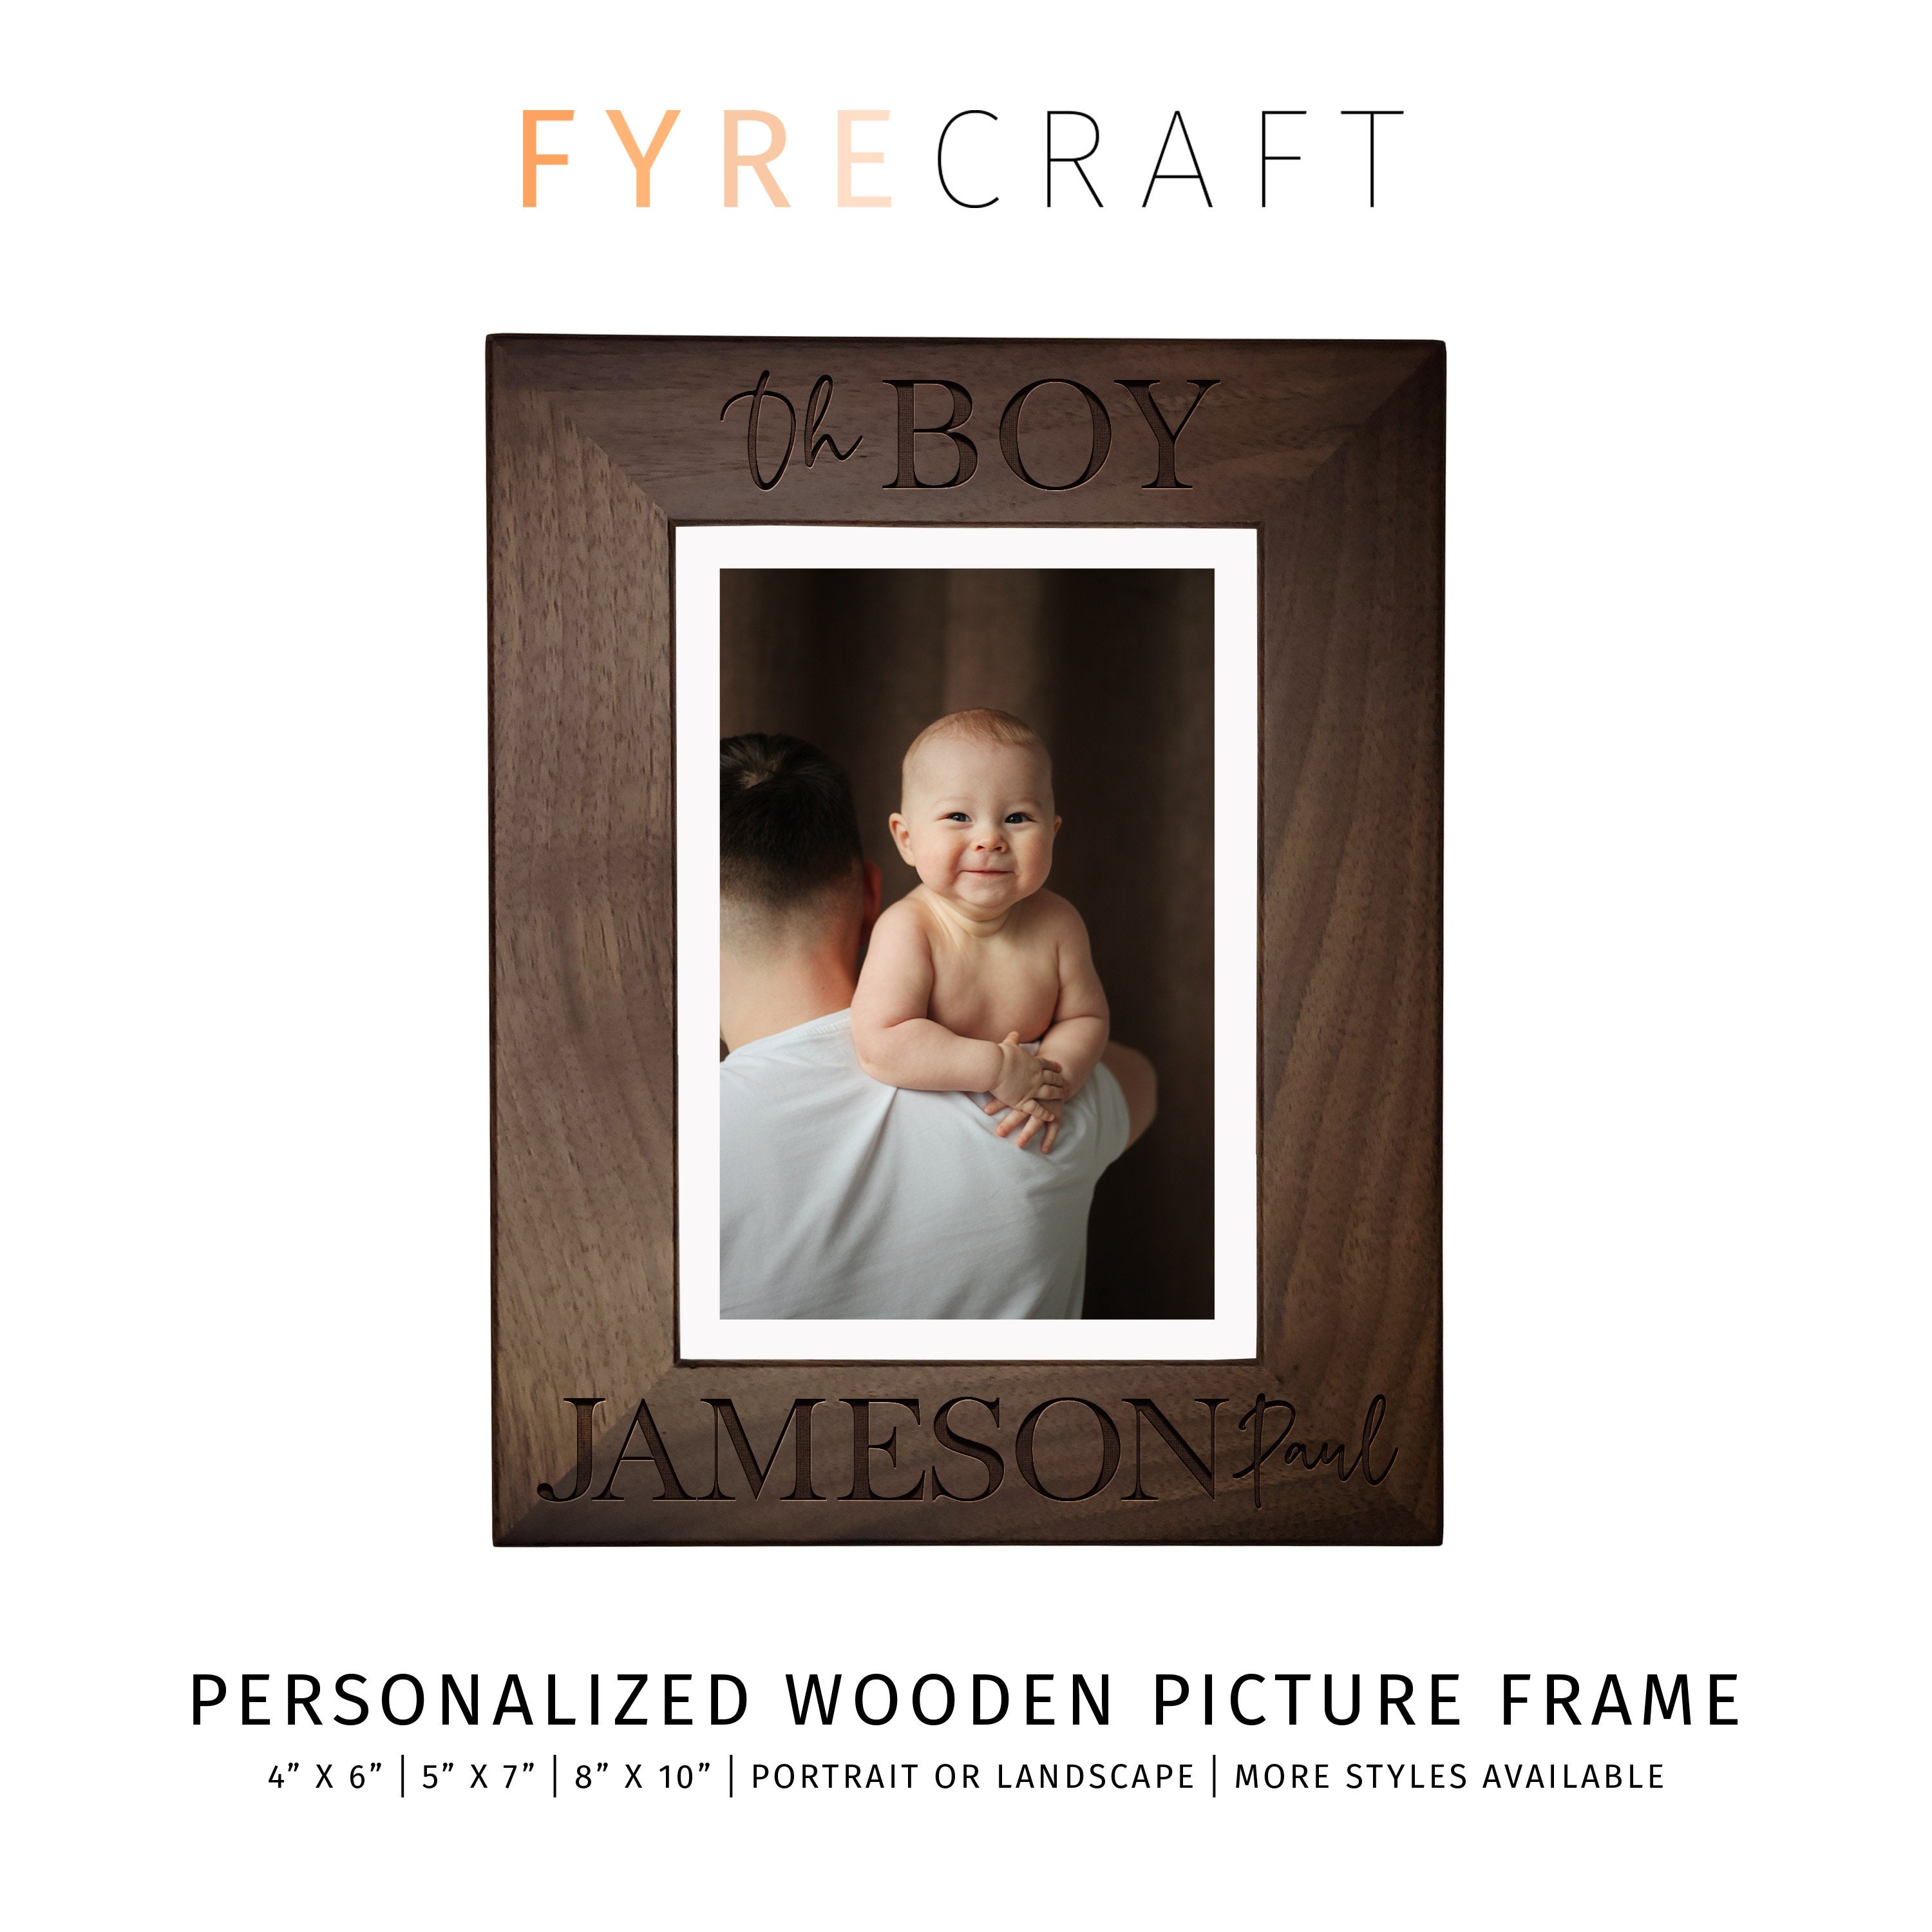 Tree Carving Engraved Wood Personalized Picture Frame for